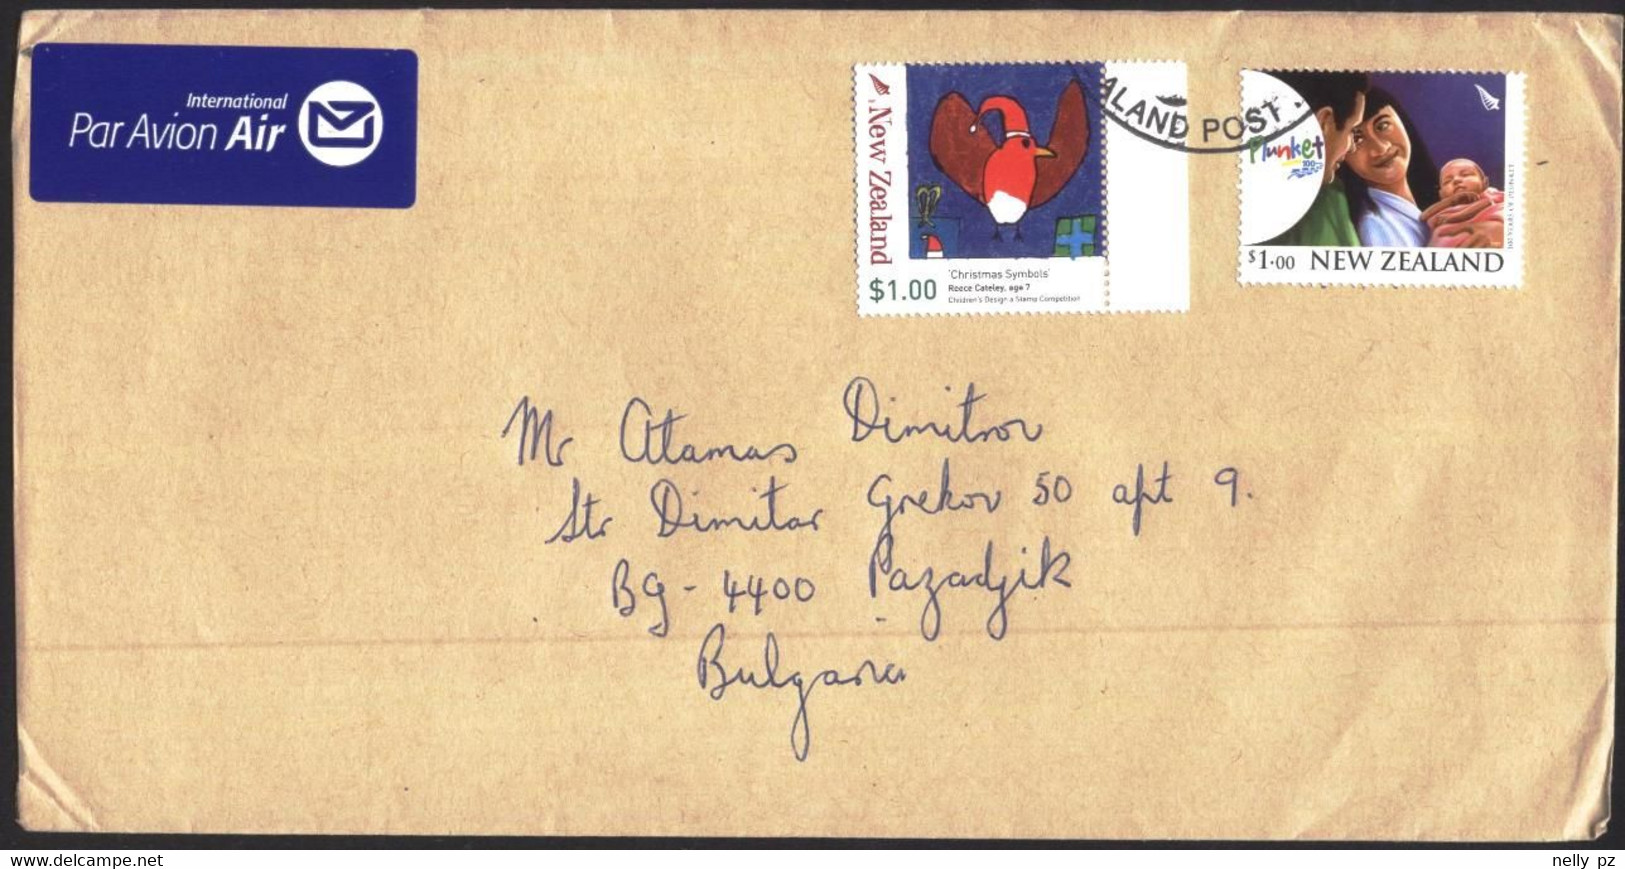 Mailed Cover With Stamps  Christmas Symvols 2007, Plunket From New Zealand - Covers & Documents